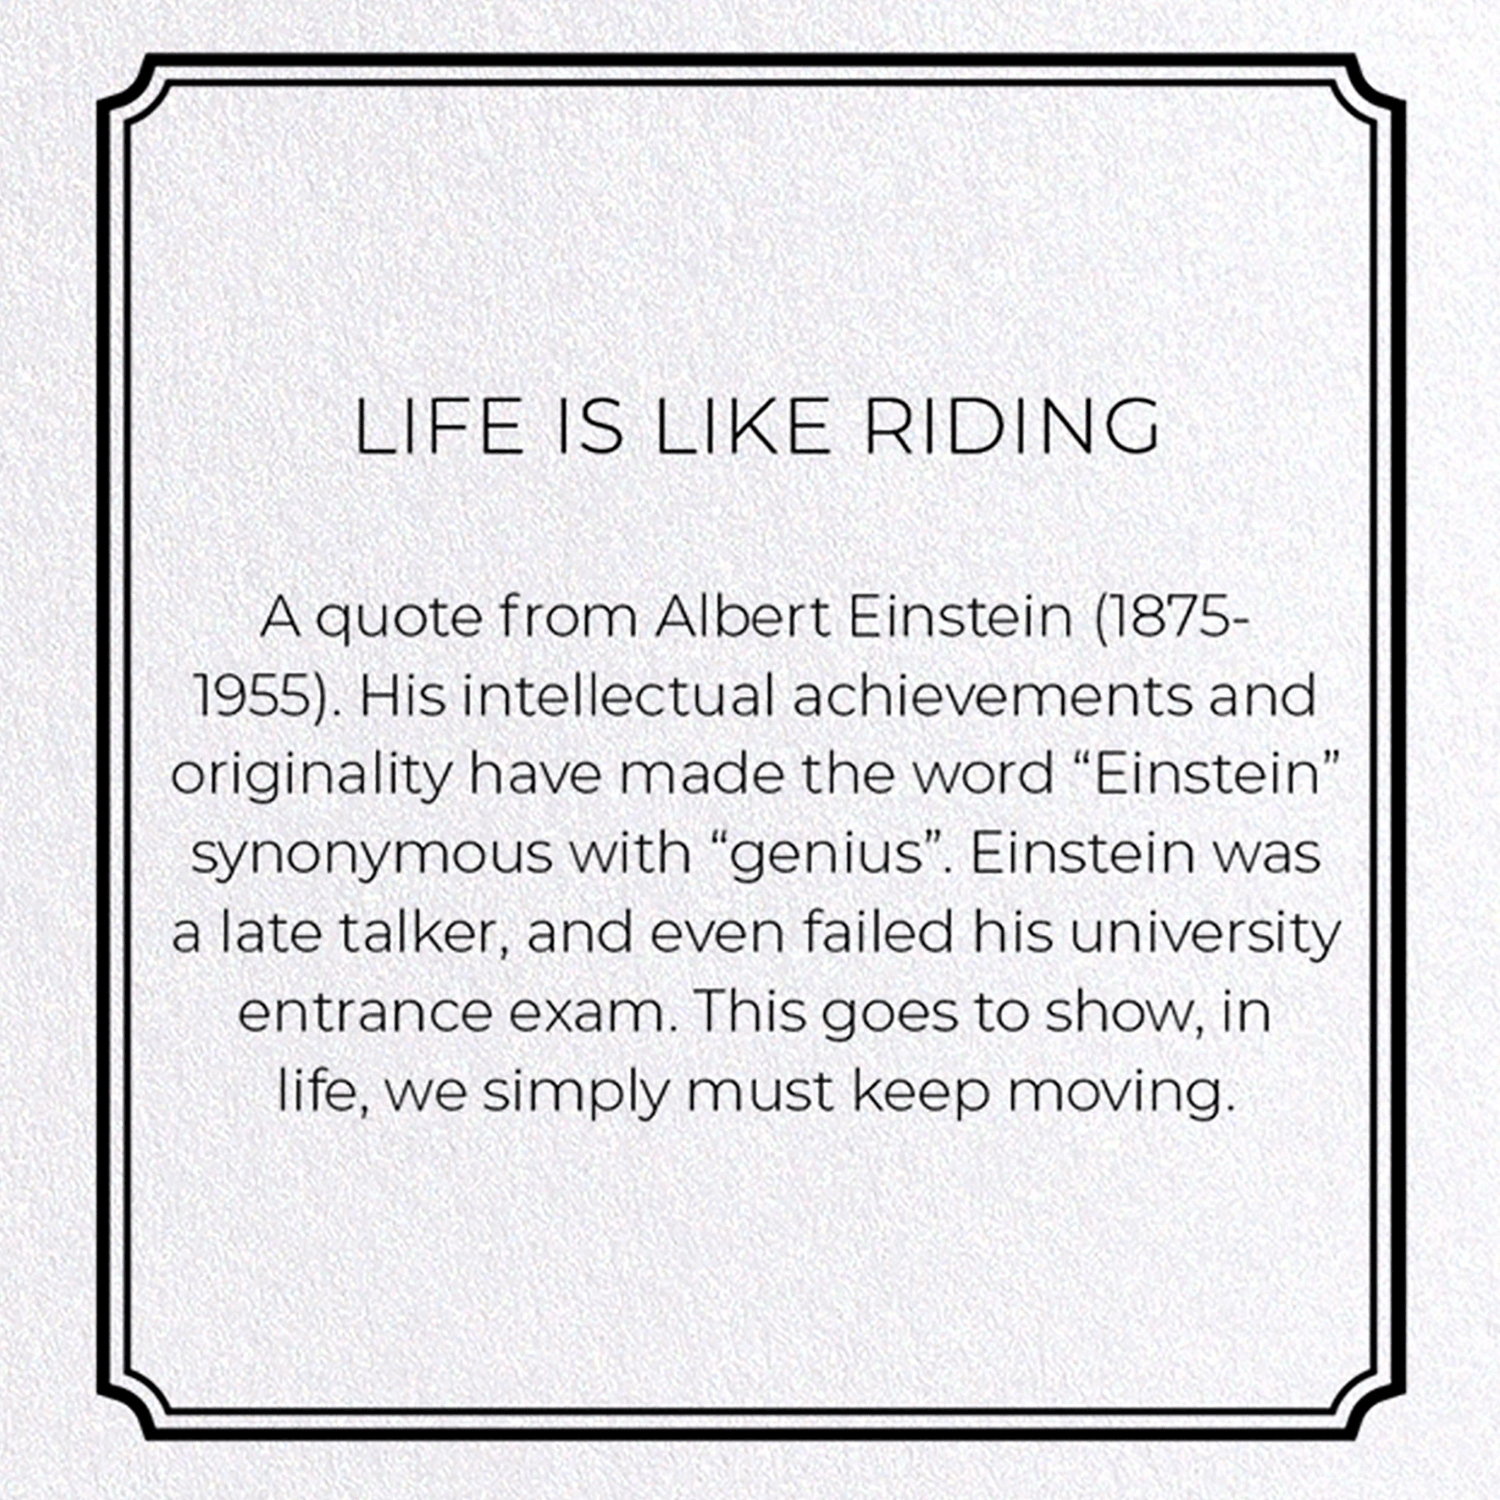 LIFE IS LIKE RIDING